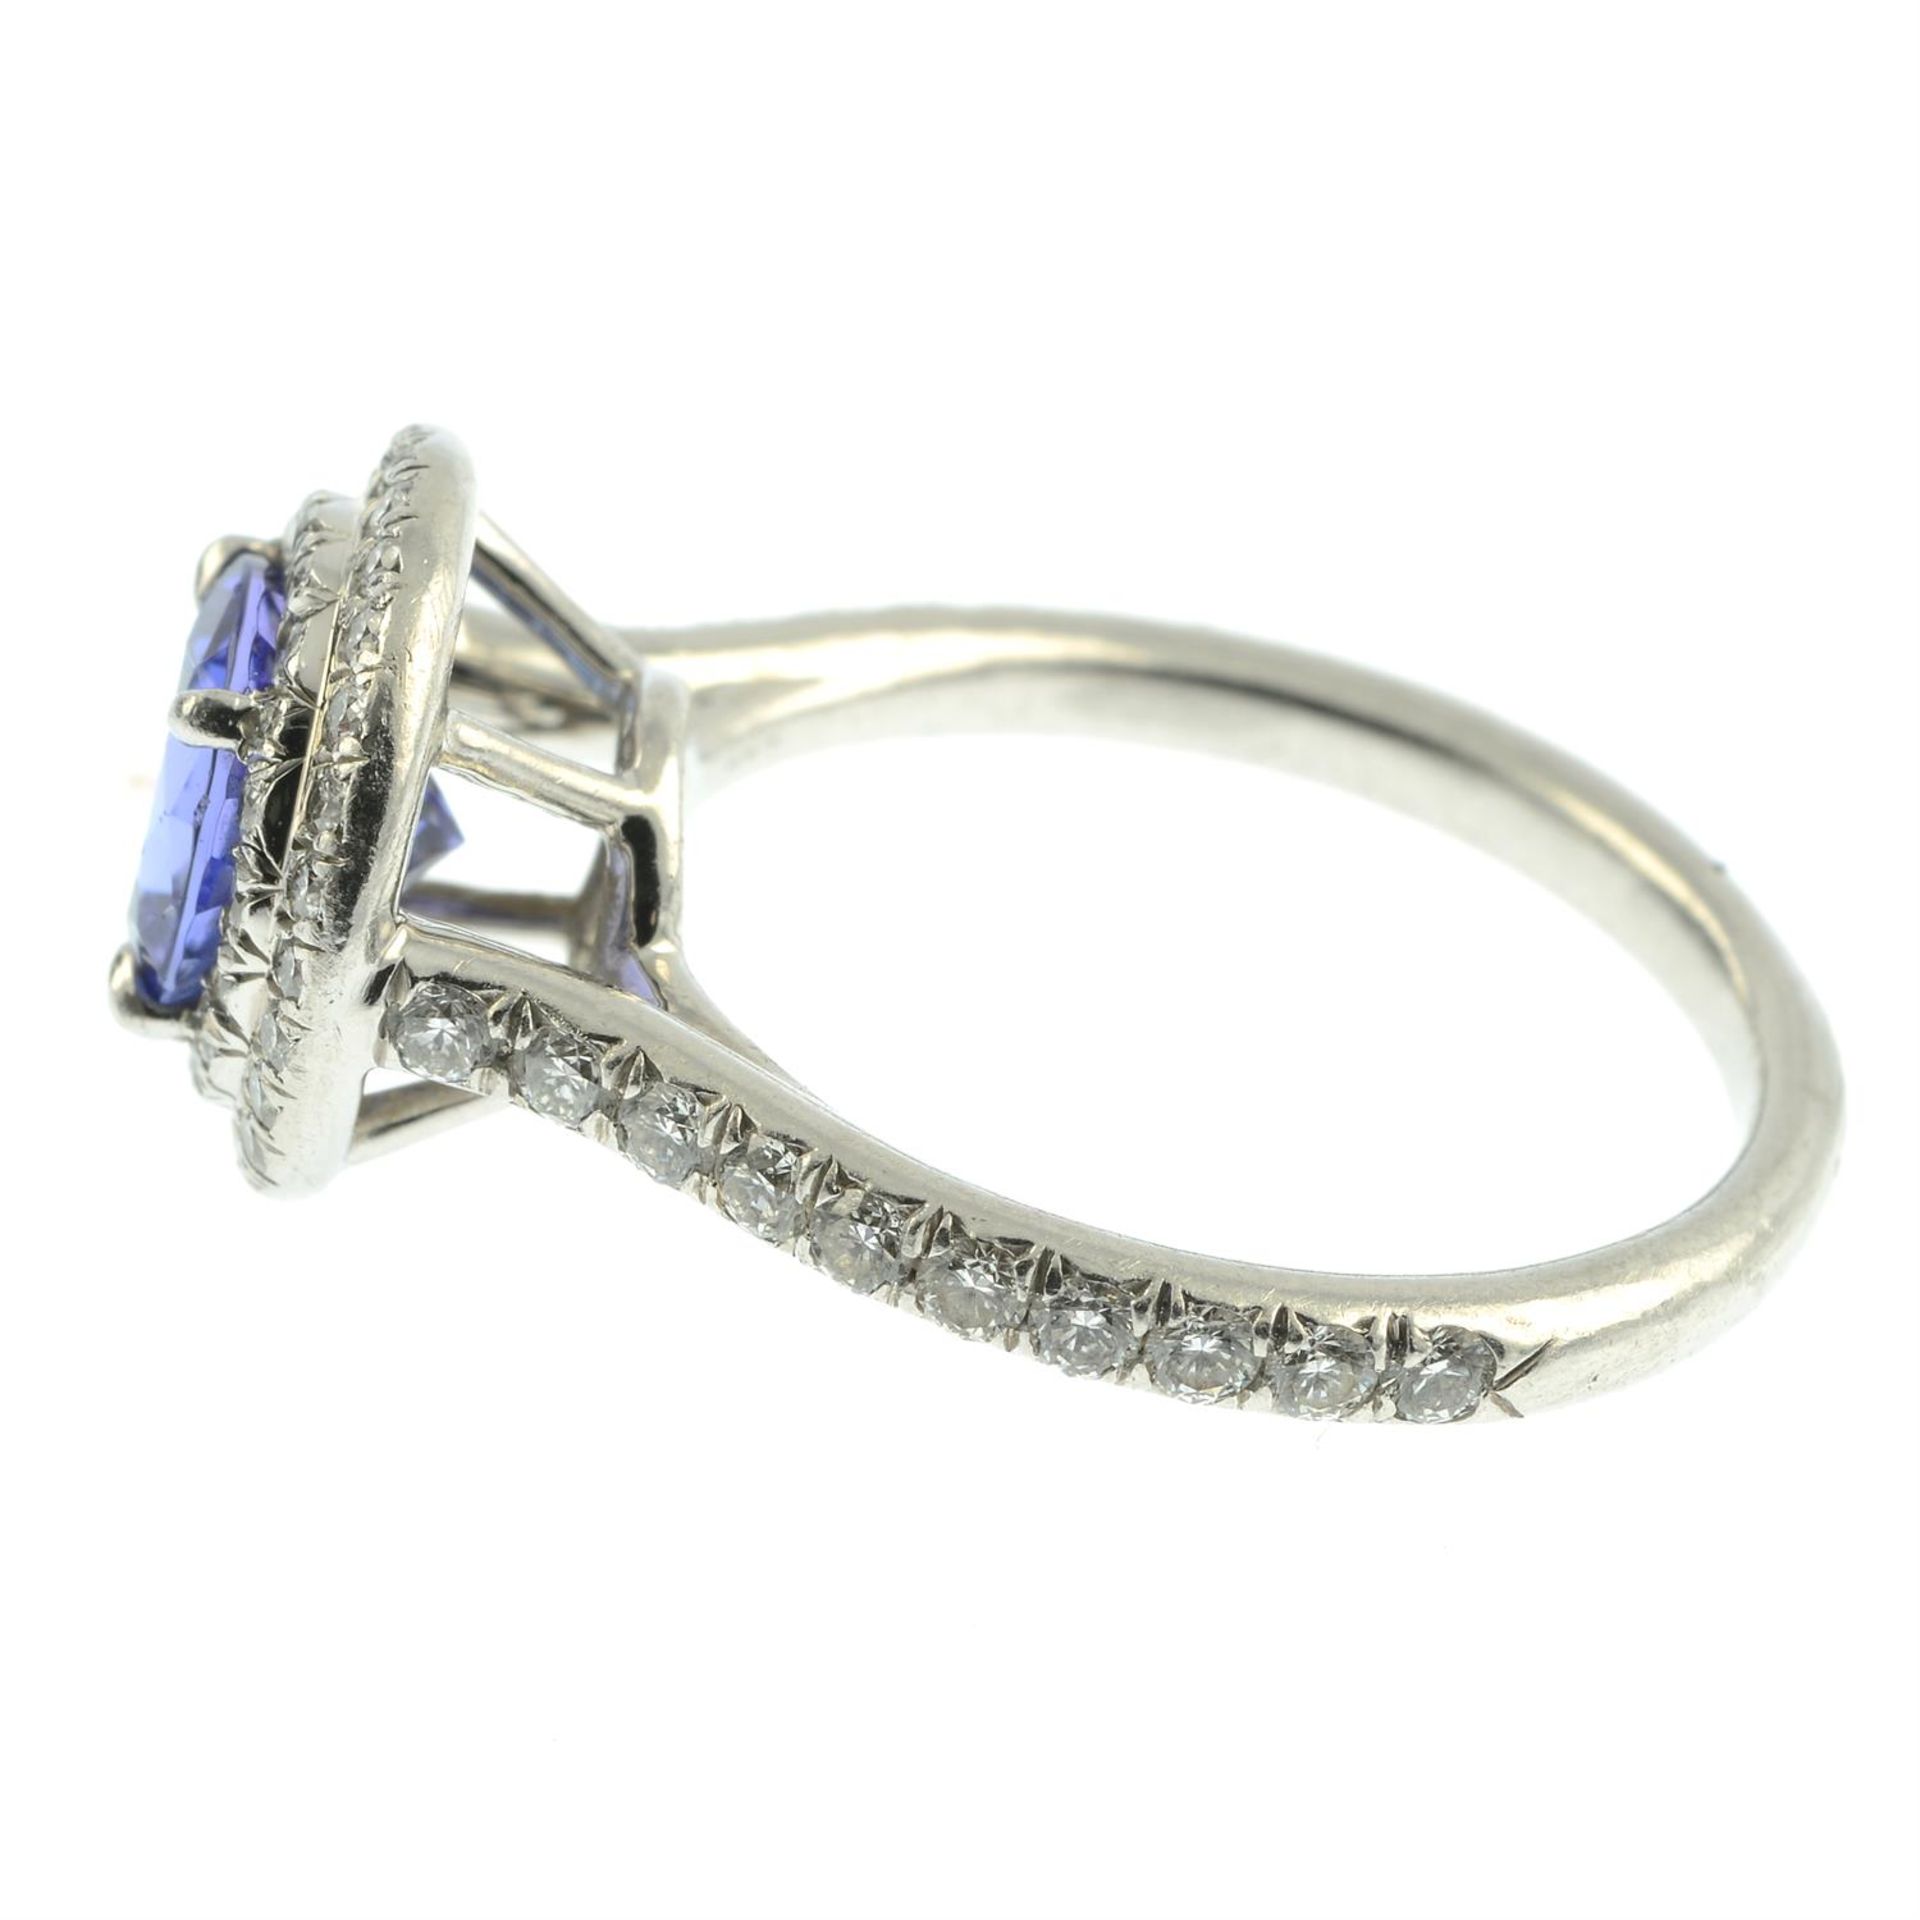 A platinum tanzanite and brilliant-cut diamond cluster ring, by Tiffany & Co. - Image 3 of 5